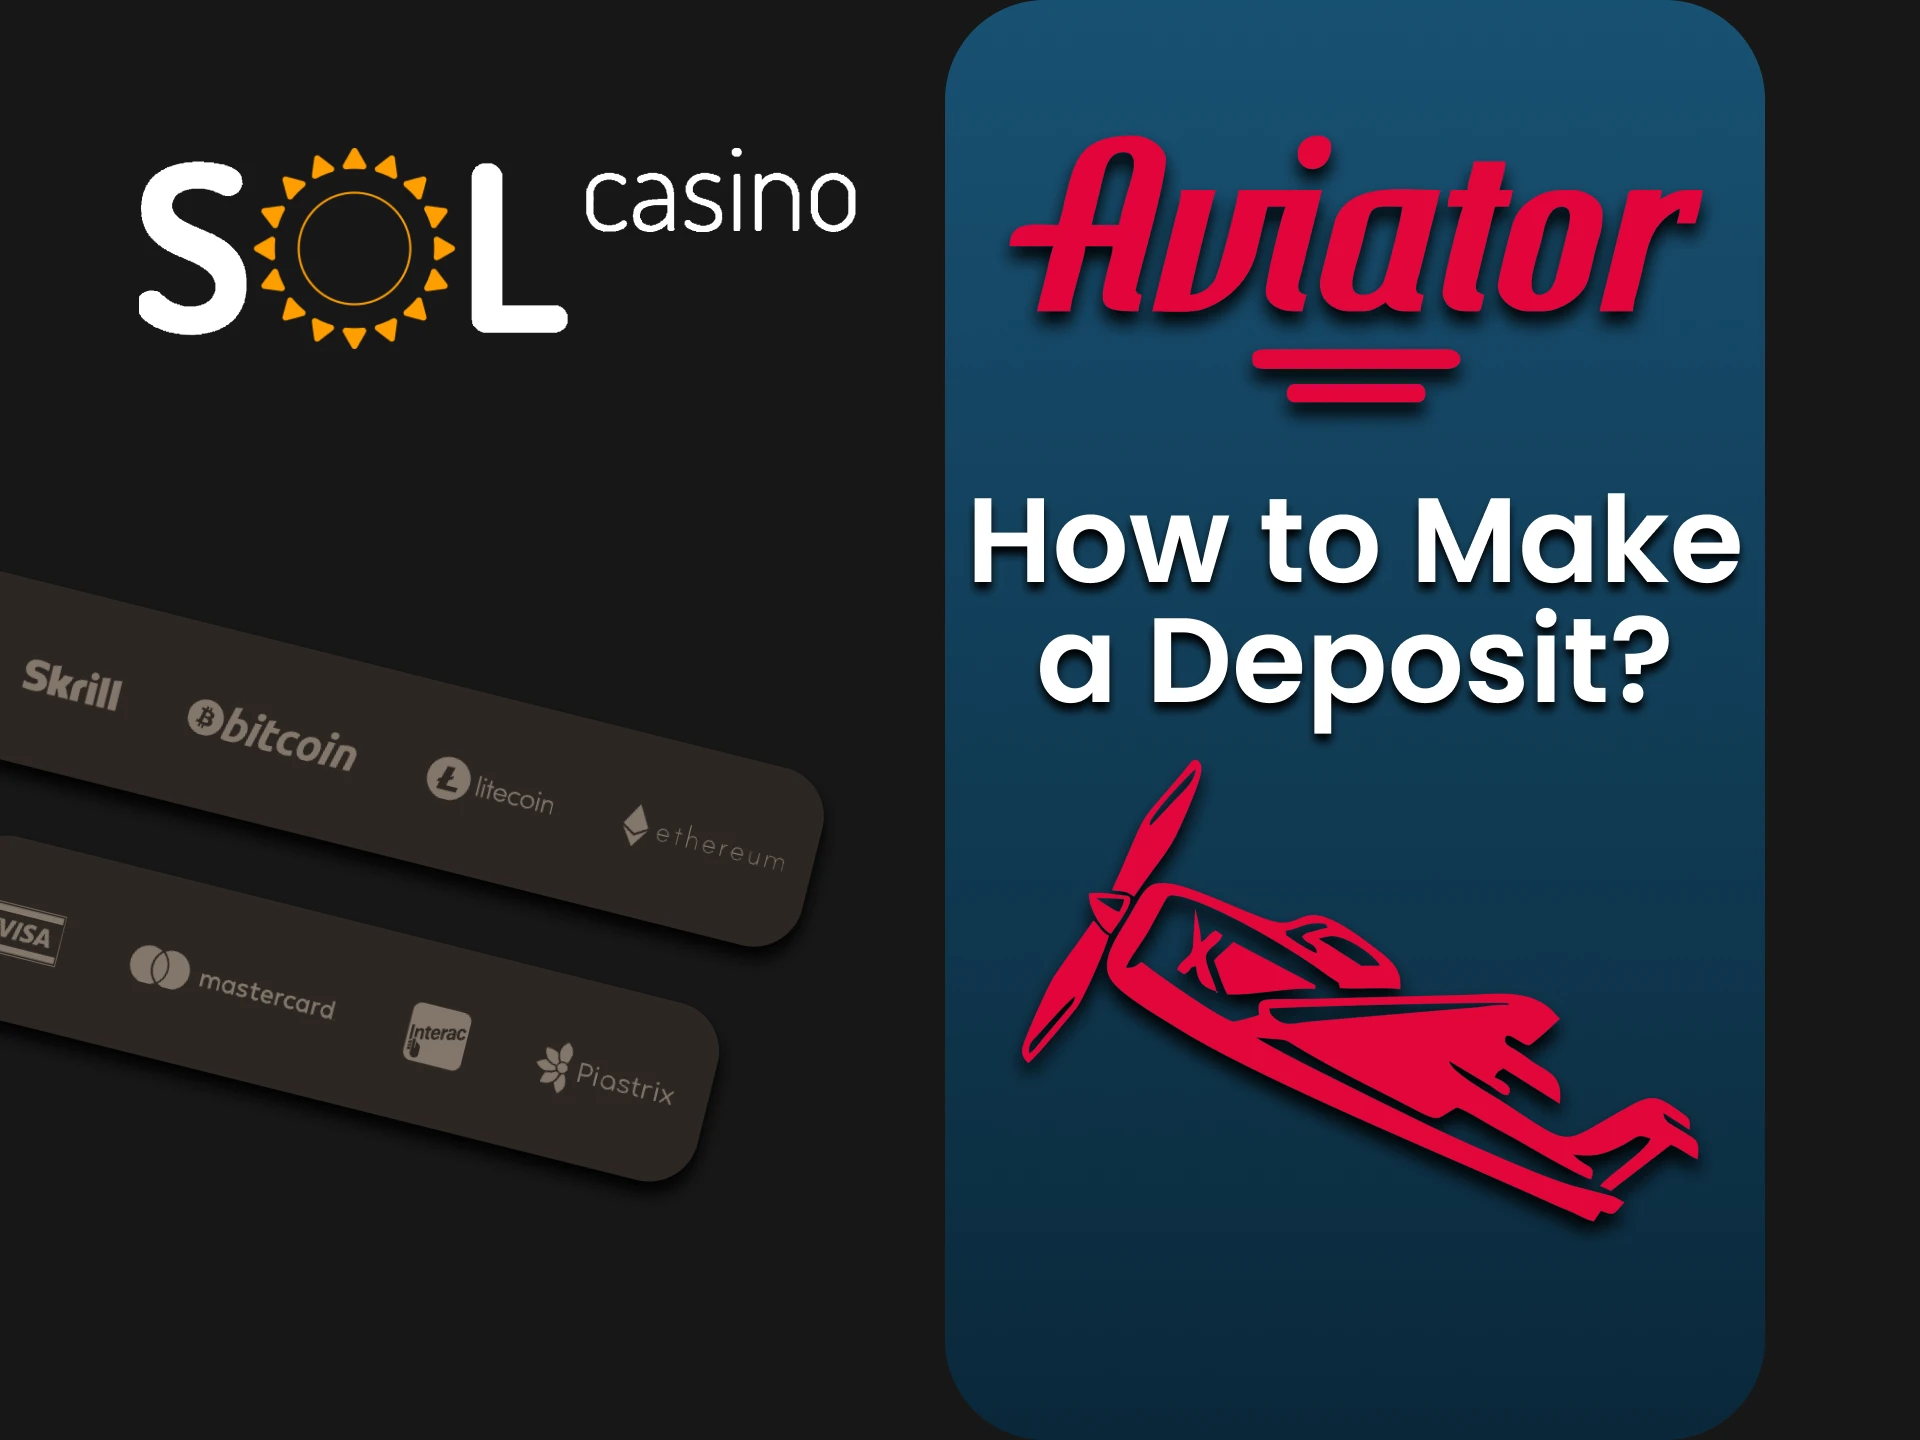 We will tell you about ways to top up funds at Sol Casino for Aviator.